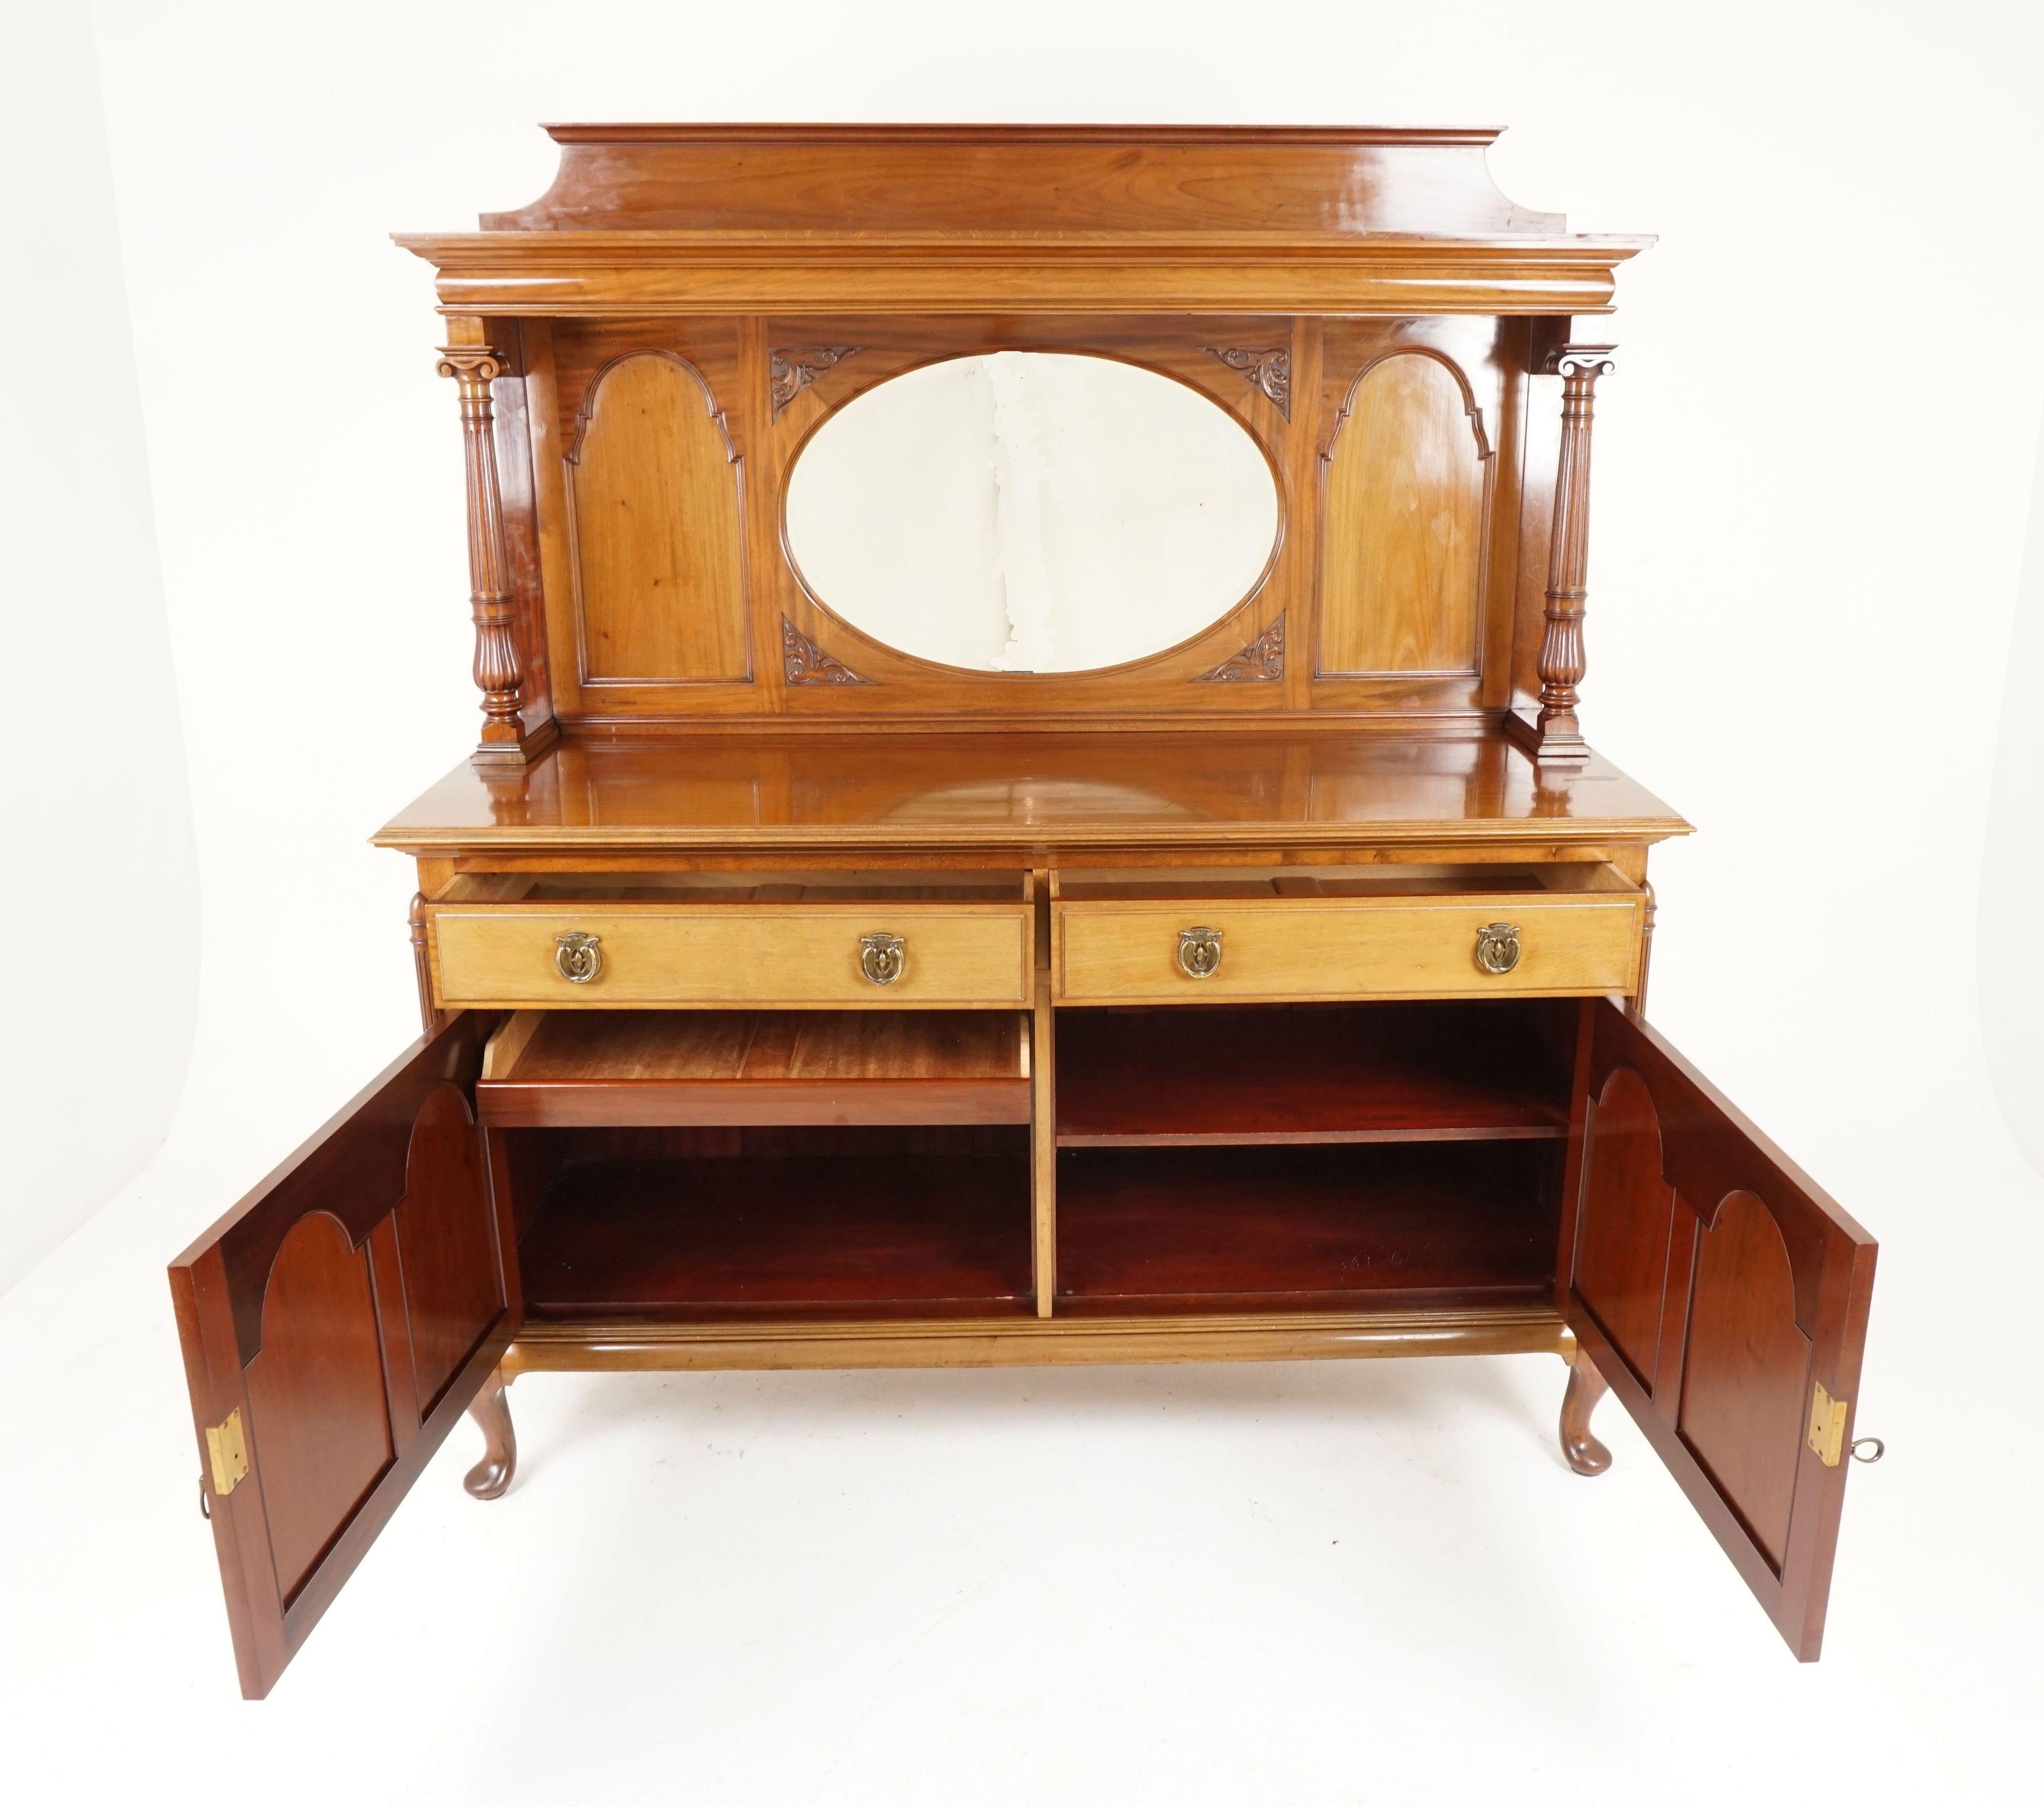 Antique Walnut sideboard, mirror back, carved Art Nouveau buffet, Scotland 1920, H134

Scotland 1920
Solid Walnut
Original finish
The gallery back has a top shelf
Held up by a pair of carved turned columns
The back has an oval beveled glass mirror